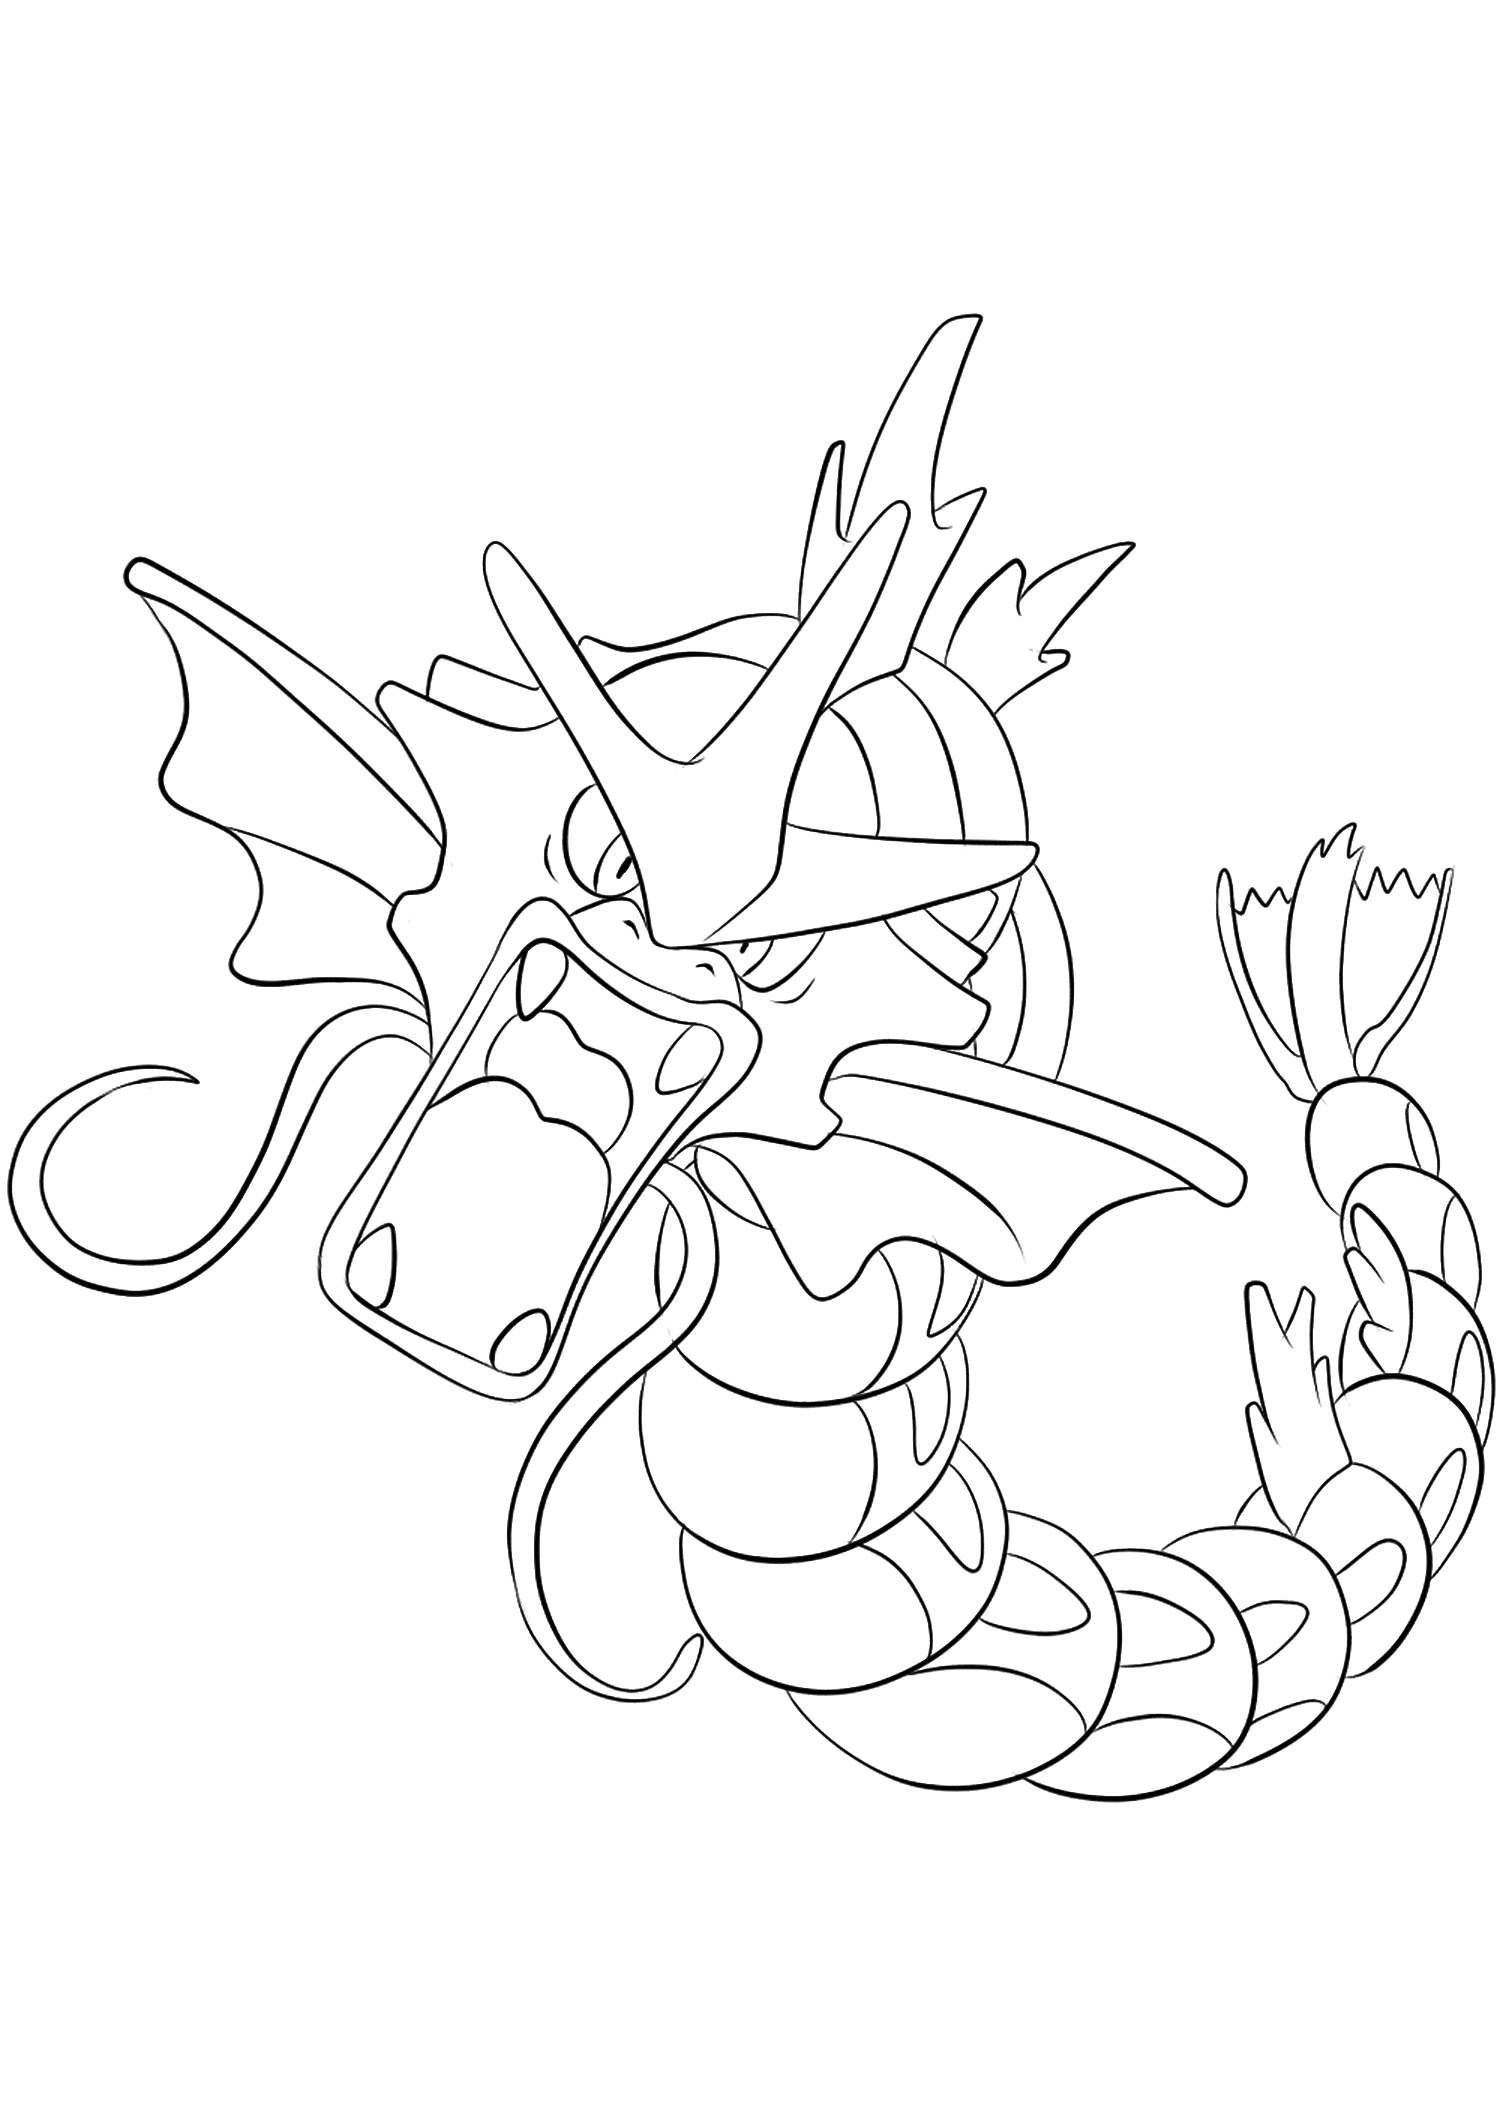 Gyarados (No.130). Gyarados Coloring page, Generation I Pokemon of type Water and FlyingOriginal image credit: Pokemon linearts by Lilly Gerbil on Deviantart.Permission:  All rights reserved © Pokemon company and Ken Sugimori.